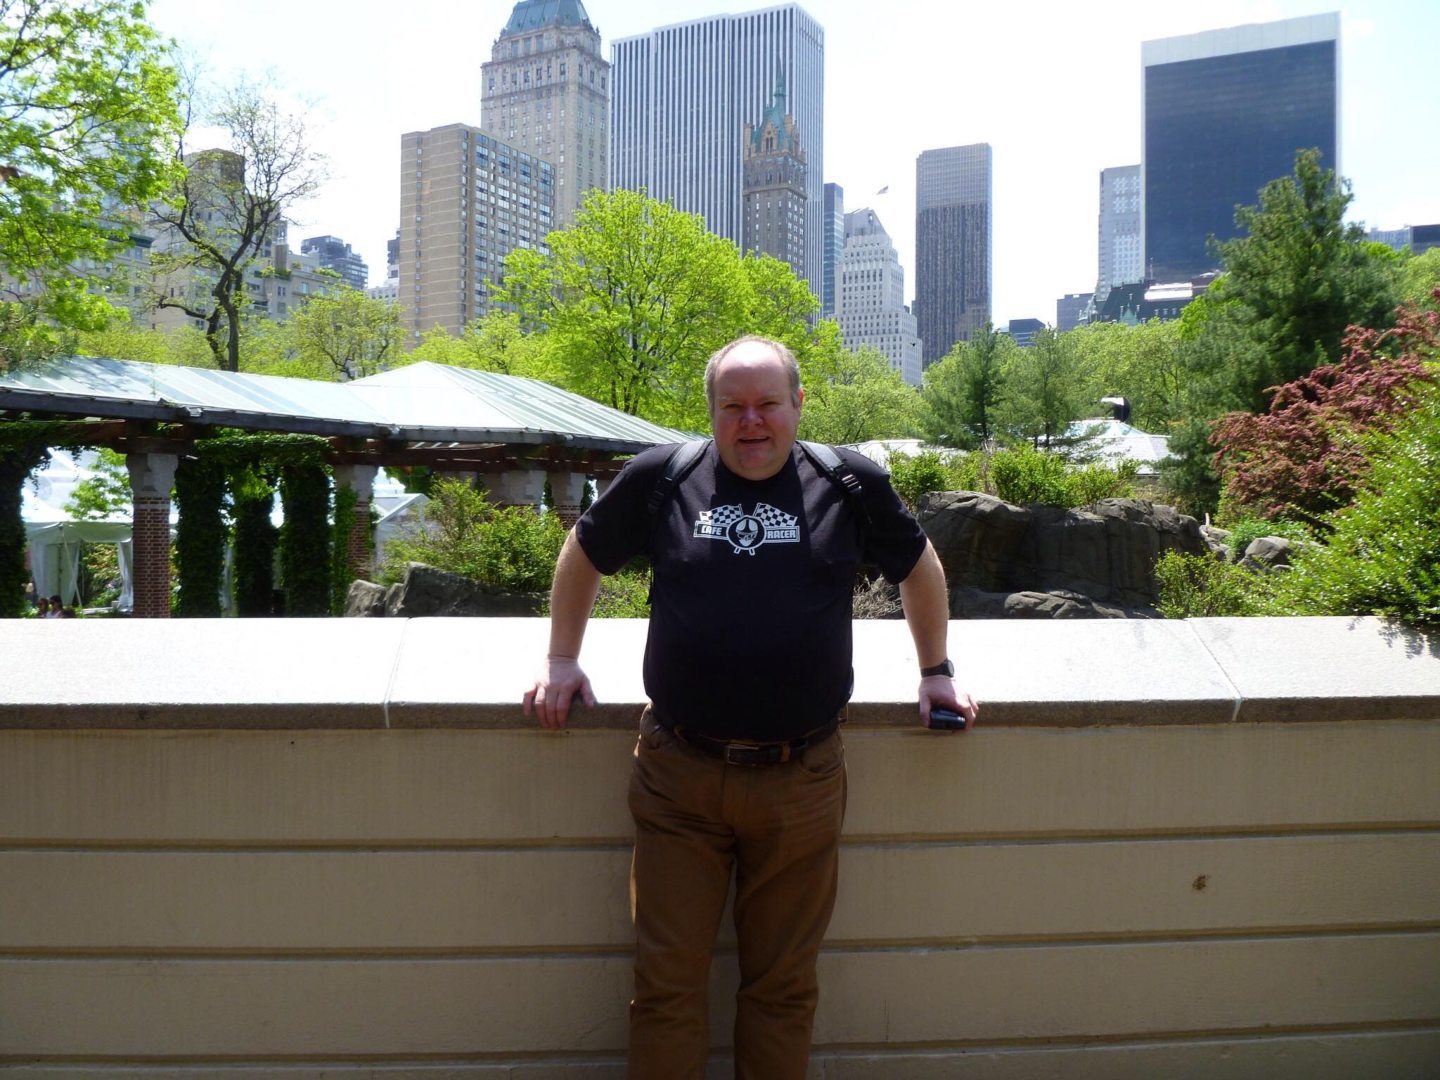 Richie Mitchell on holiday in the United States